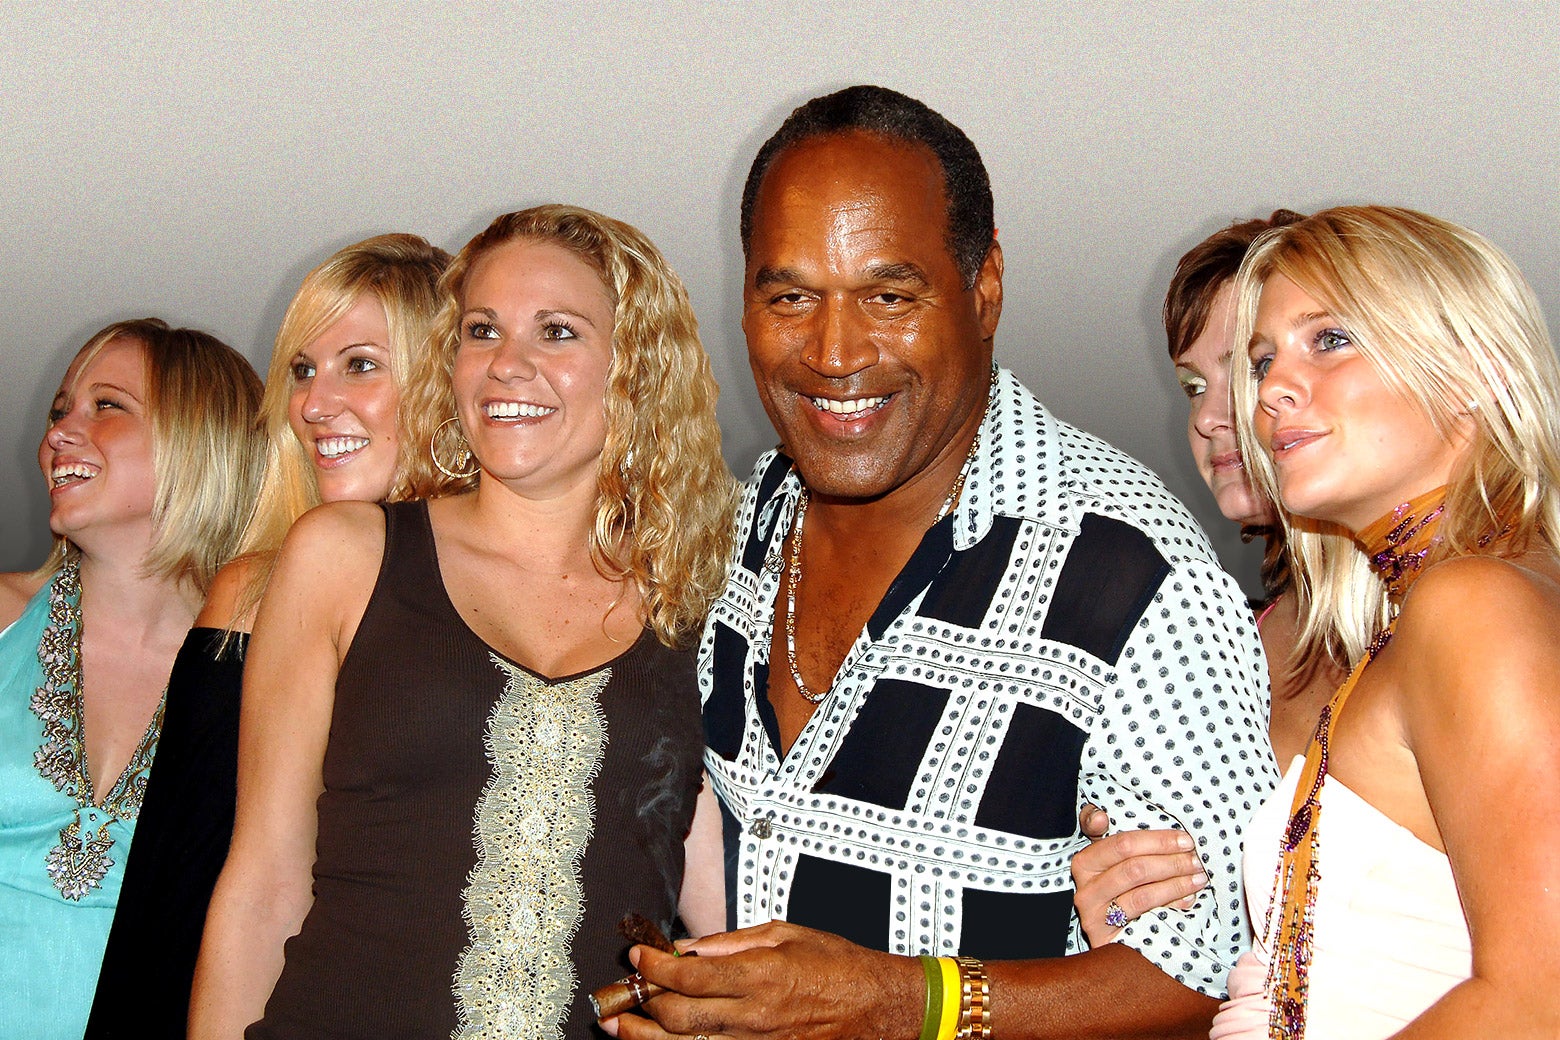 A photo of O.J. Simpson holding a cigar, surrounded by white women.